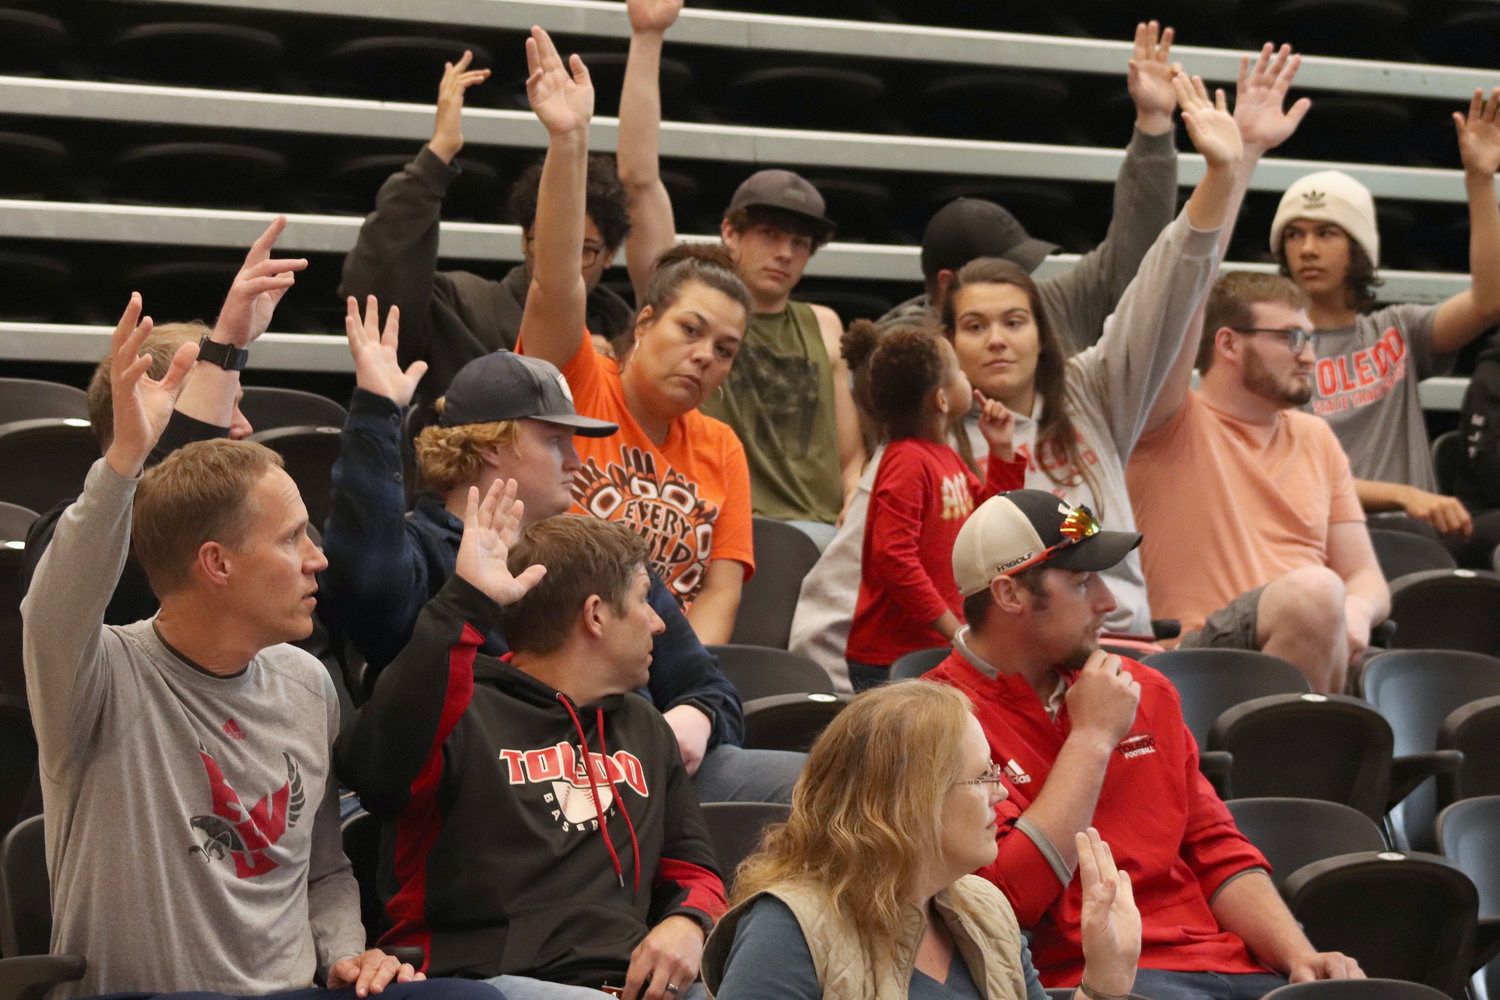 Toledo citizens raise their hands in support of a theoretical ballot measure to fund a new track and stadium during a community at Toledo High School on Tuesday.